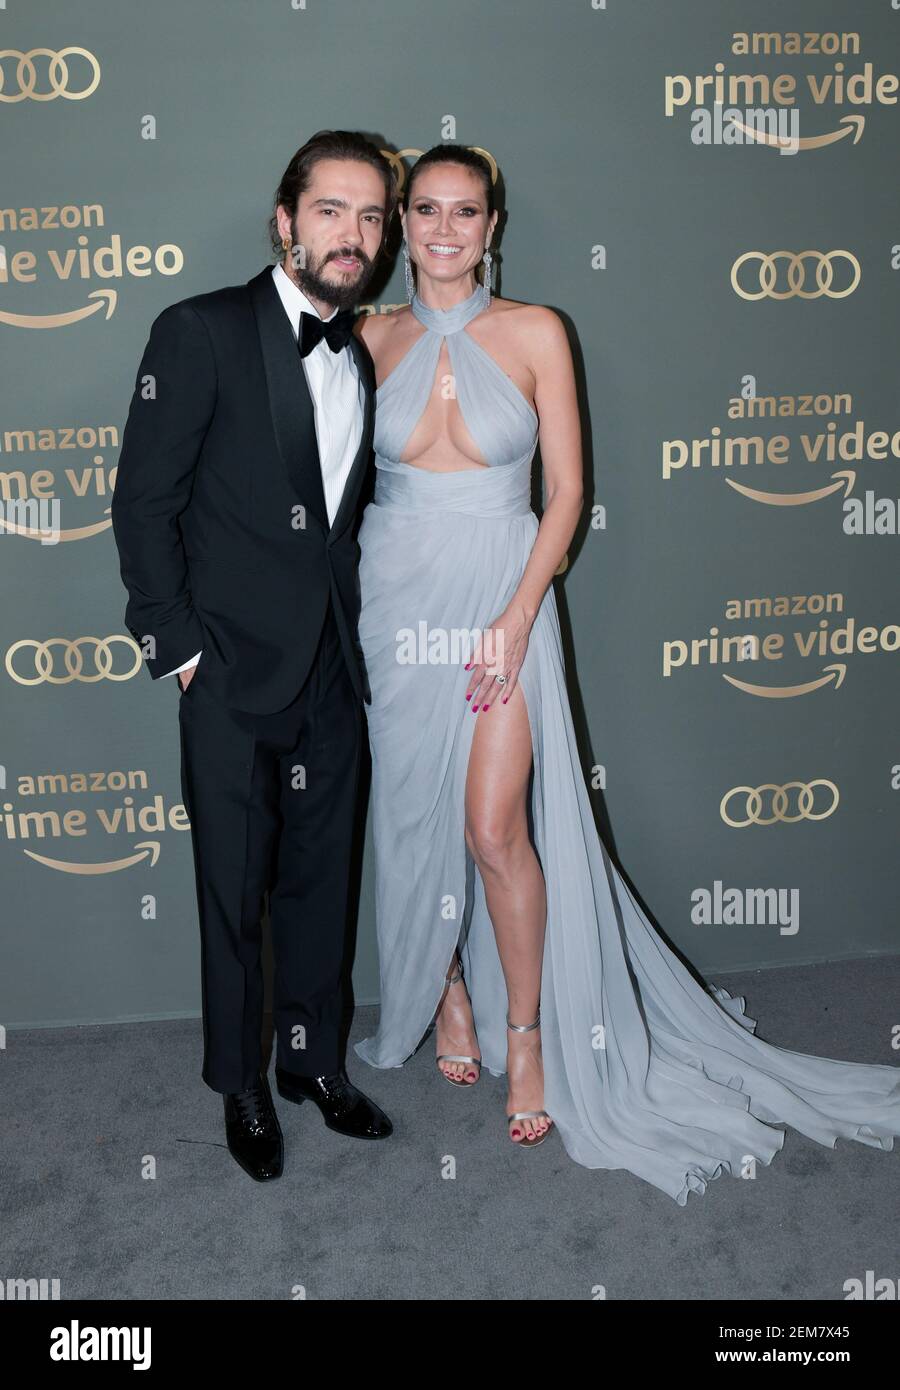 Heidi Klum and Tom Kaulitz attends the Amazon Prime Video's Golden Globe  After Party arrivals at The Beverly Hilton in Beverly Hills, CA on January  6, 2019. (Photo by Christian Monterrosa/Sipa USA